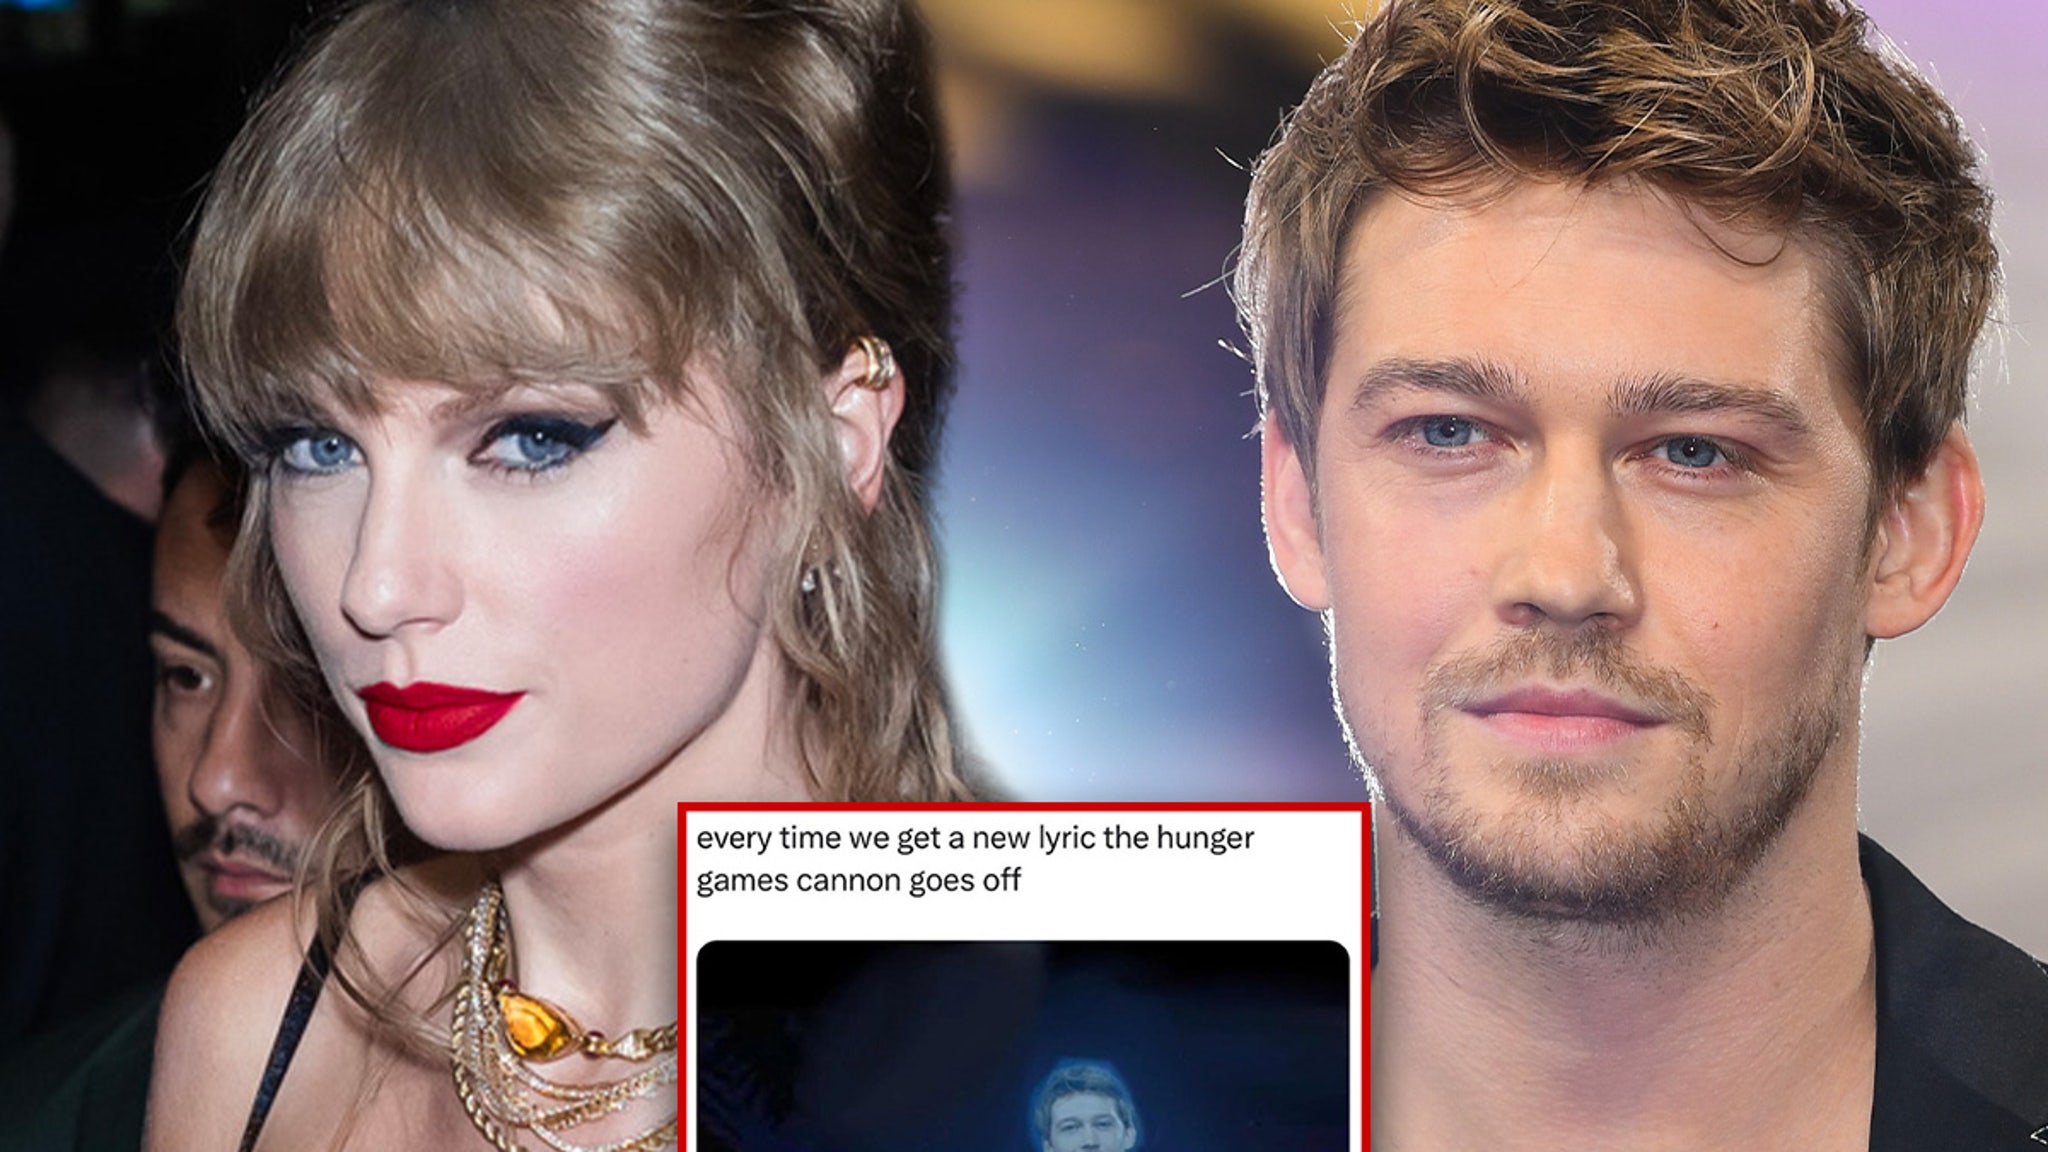 Taylor Swift Likes Shady Post About Joe Alwyn, Sings About His Depression